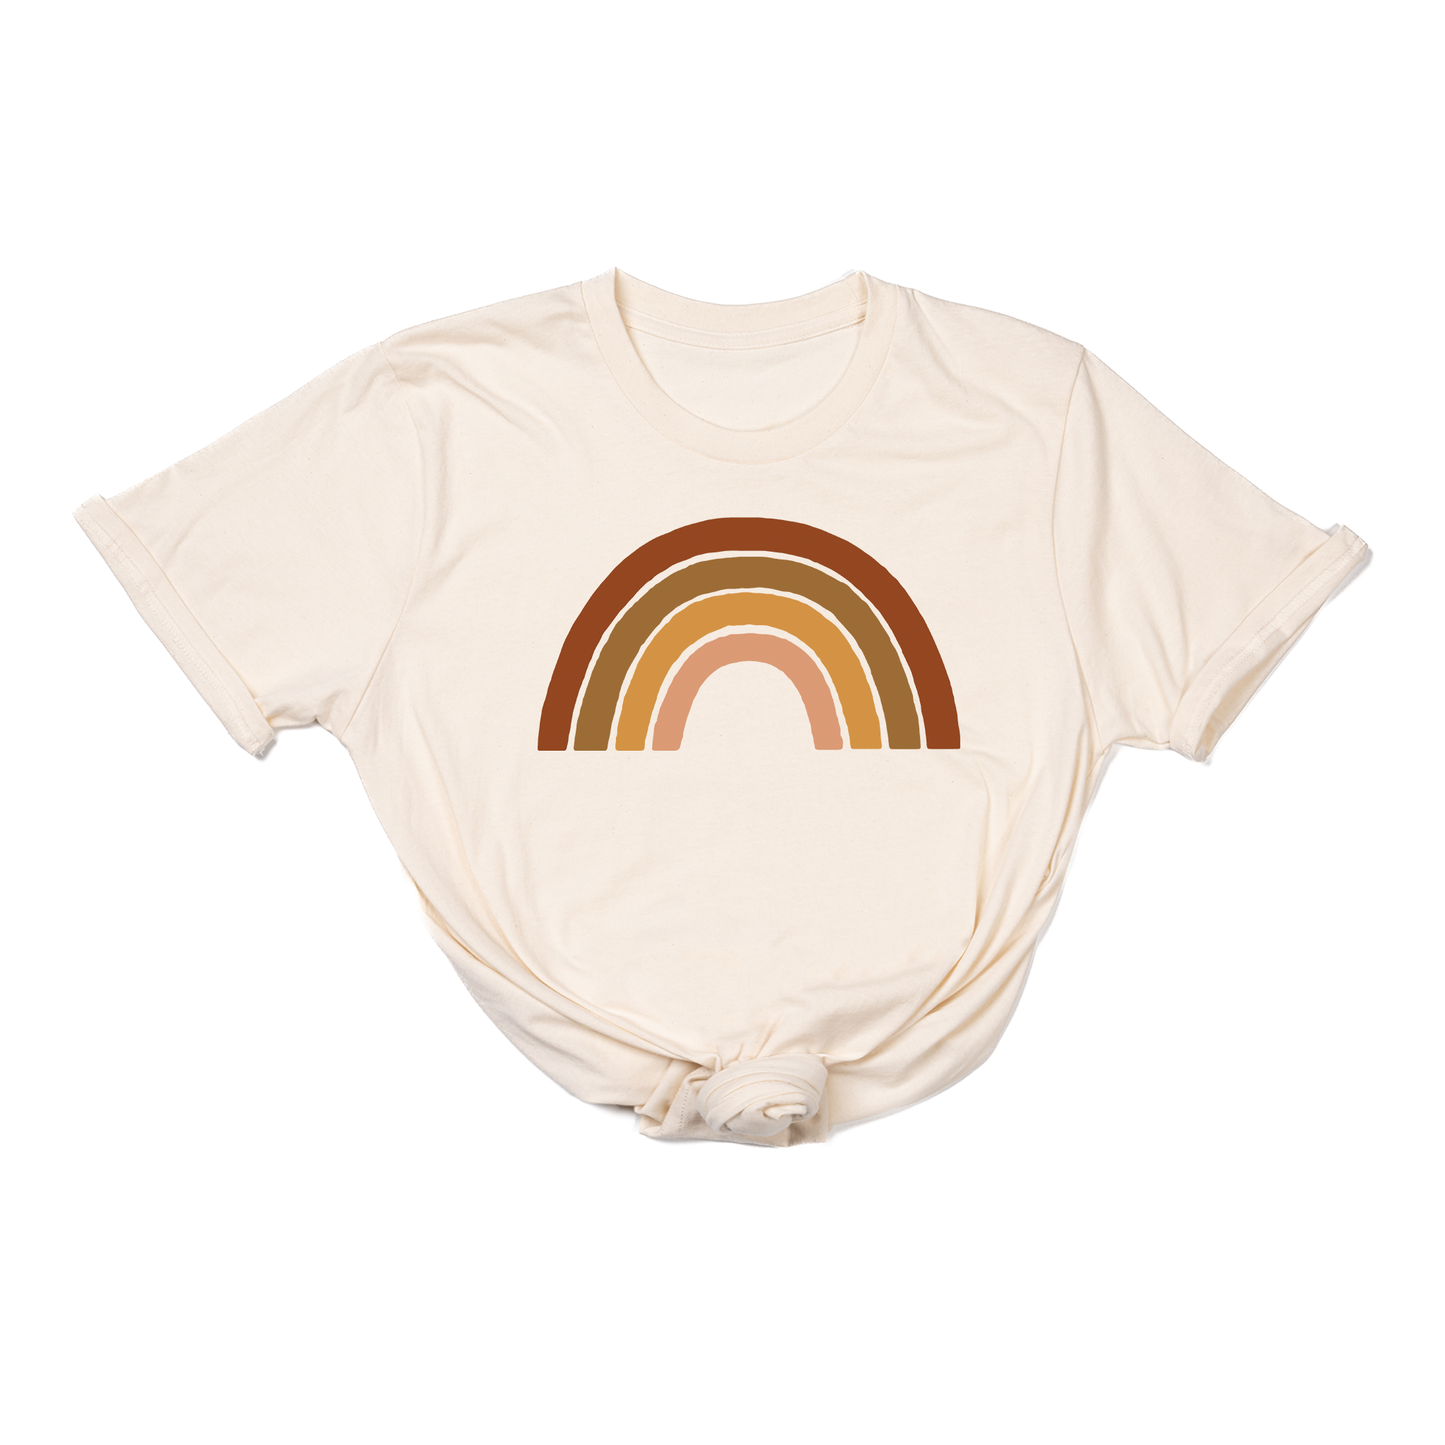 Rainbow (5 Color Options, Color Option #4) - Tee (Natural)